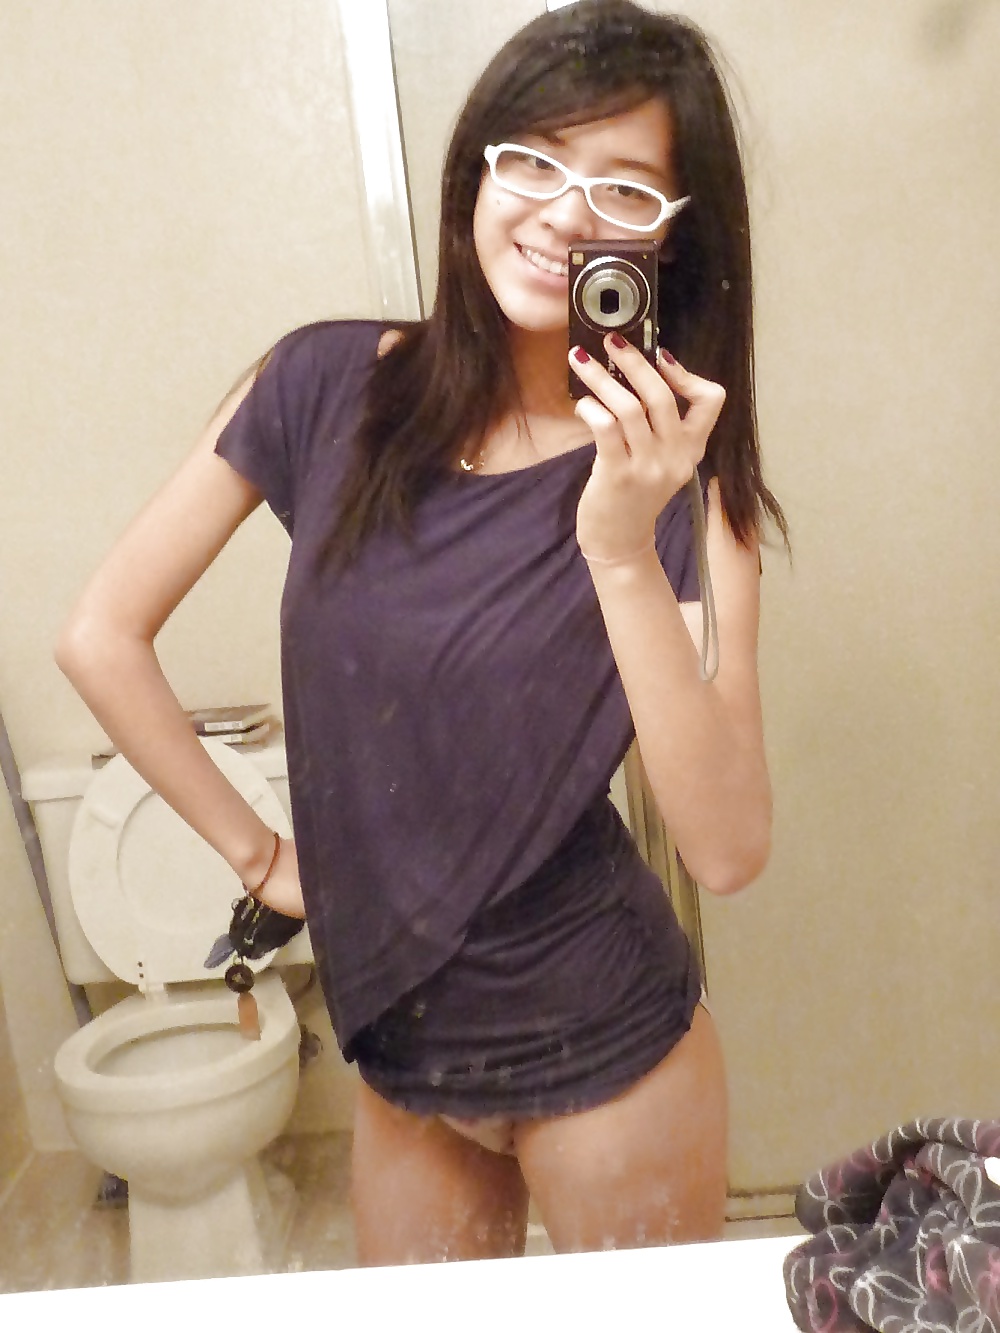 Sex Gallery Nude asian girl with glasses sexy